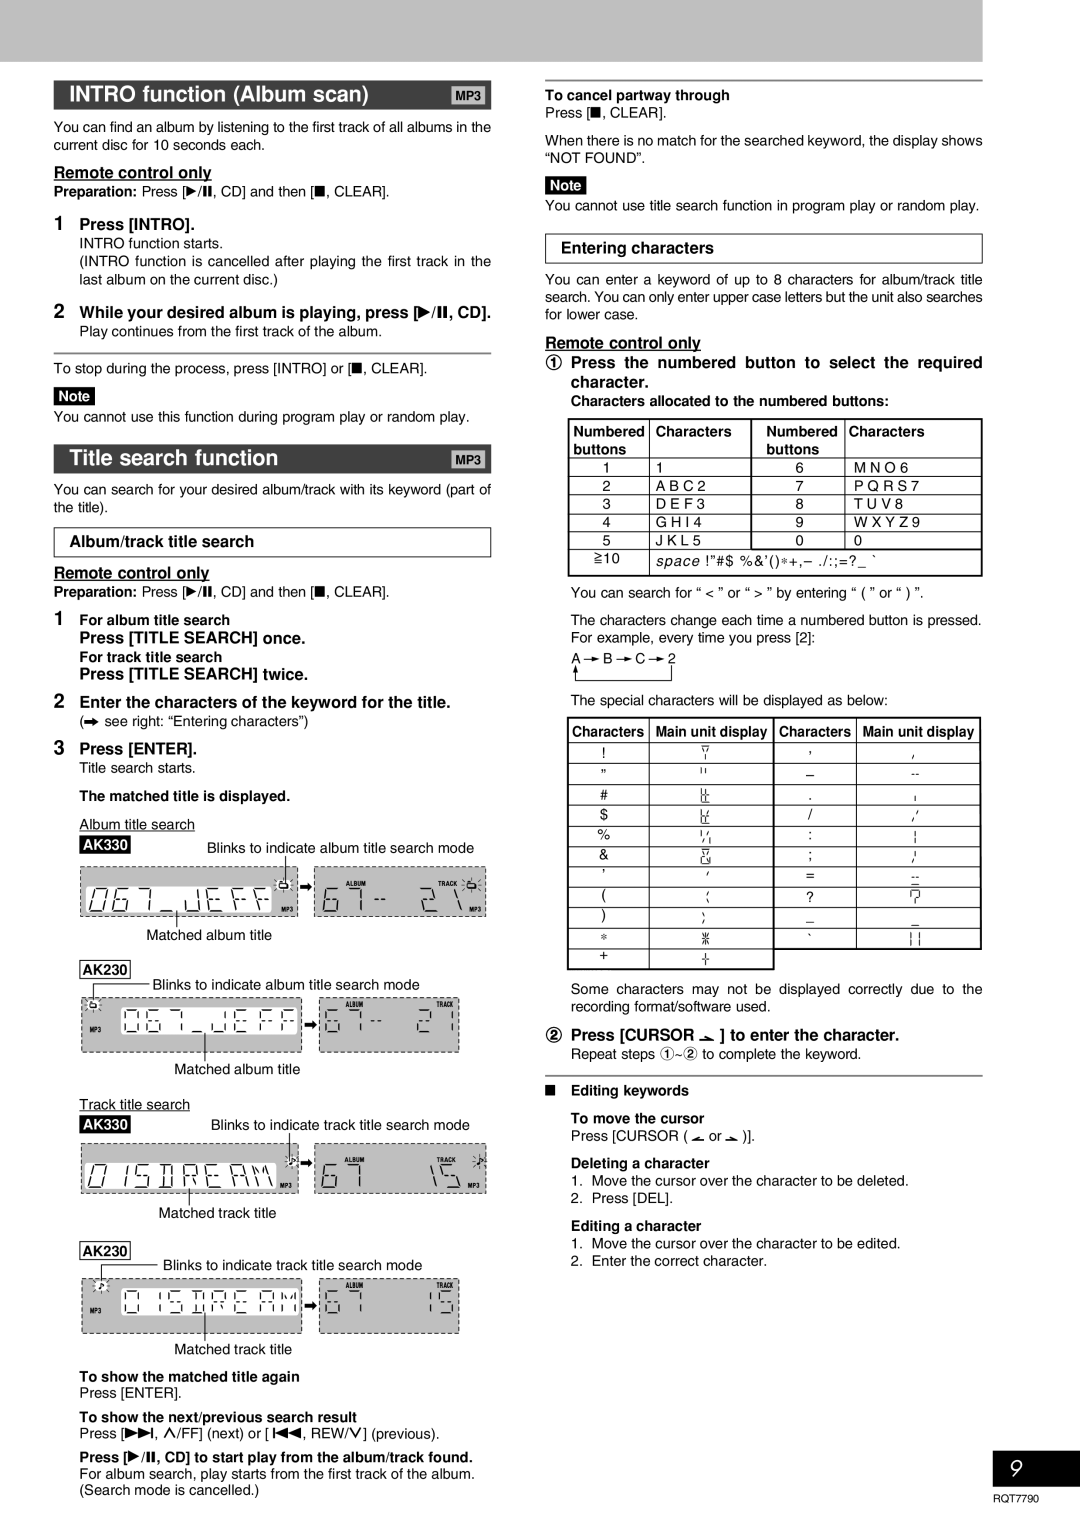 Panasonic SC-AK330 important safety instructions INTRO function Album scan, Title search function 